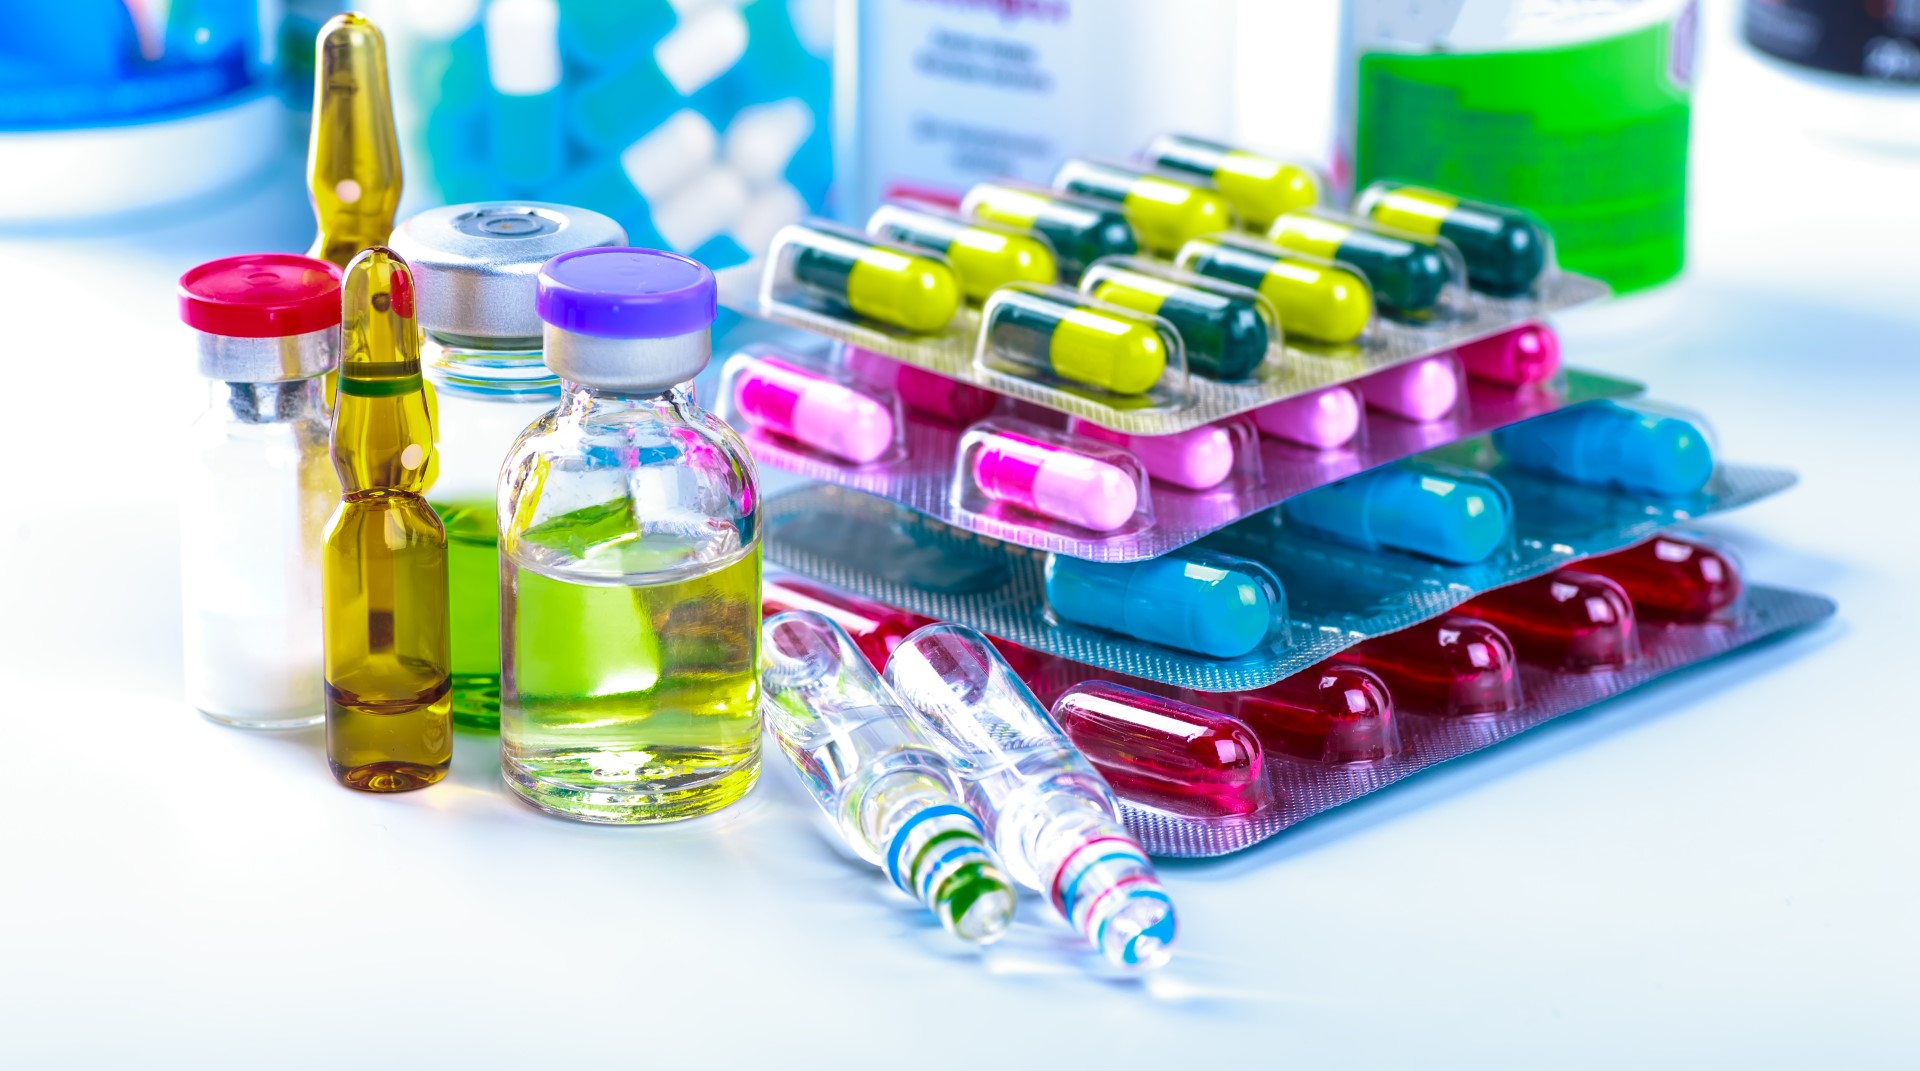 Specialty Pharmaceuticals Market Size hit $210 billion by 2031, Growing at a CAGR of 18% from 2021